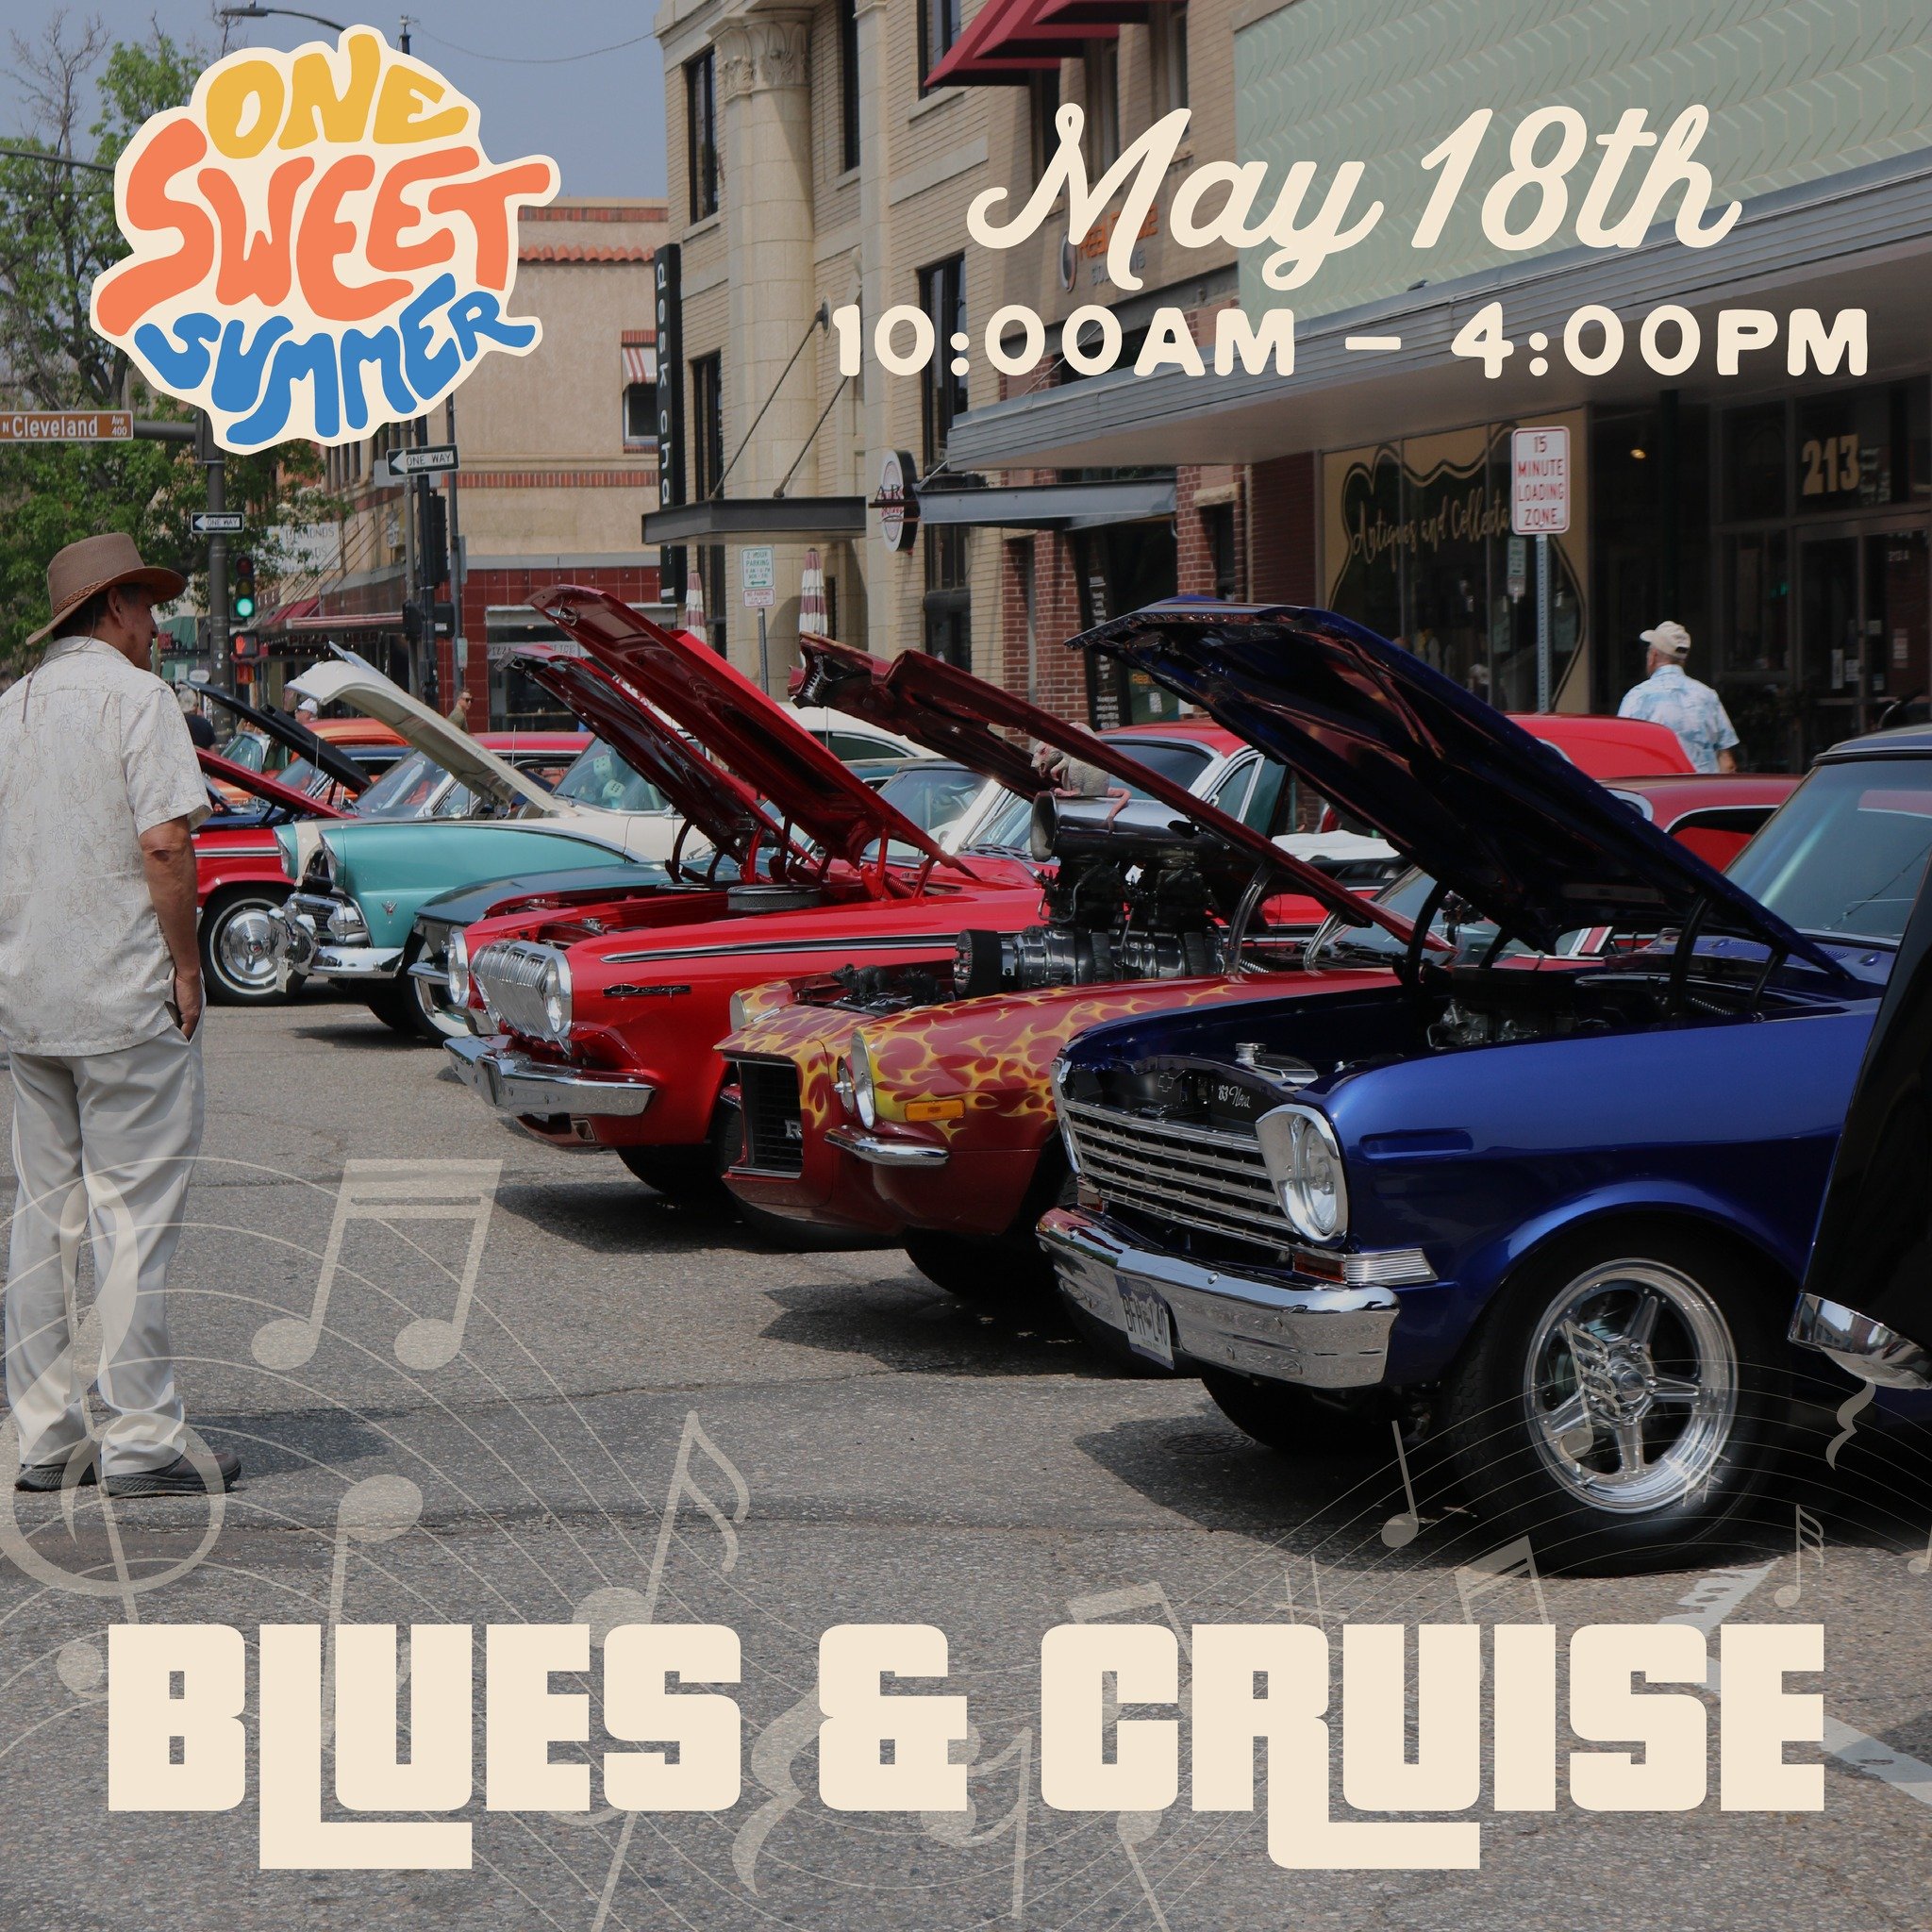 Blue and Cruise is TOMORROW!! Be sure to swing downtown for this FREE event! 
10:00am &ndash; 4:00pm | Downtown Loveland

Blues music can be found in 2 locations Downtown:
5th Street Stage- 
Noon-1:15pm- 50 Shades of Blue
1:45-3:00pm- David Michael B